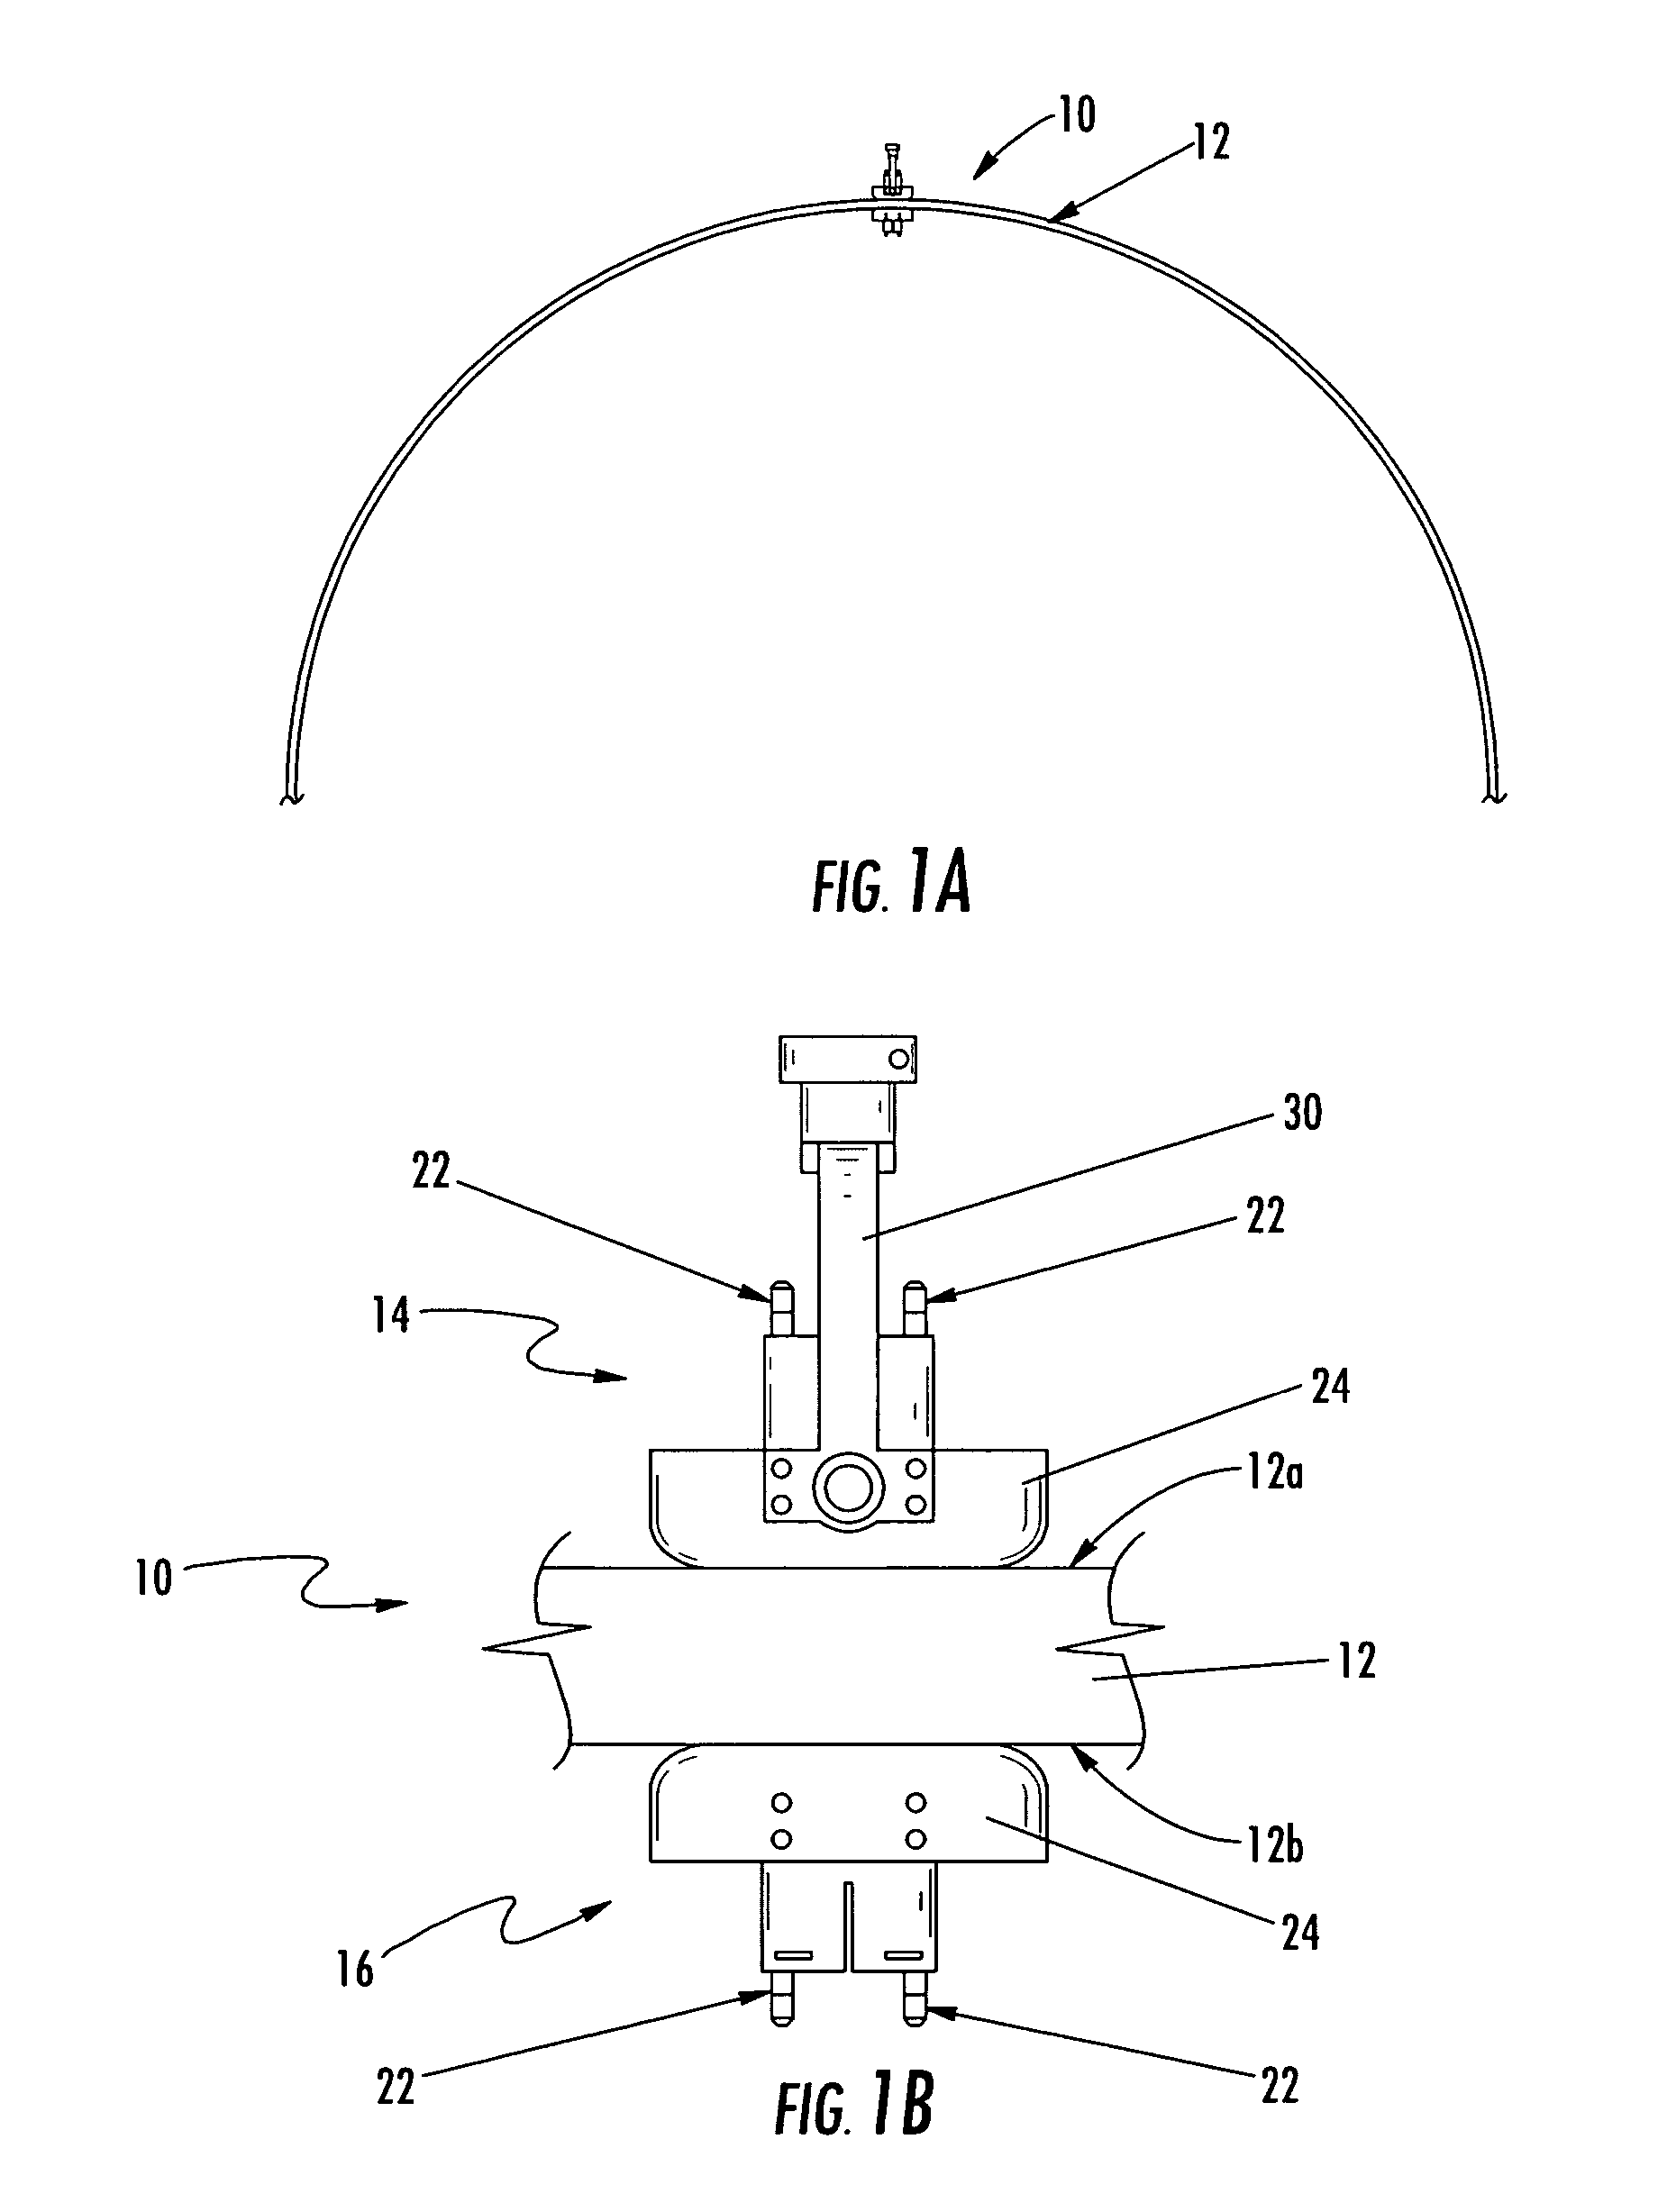 Alignment compensator for magnetically attracted inspecting apparatus and method